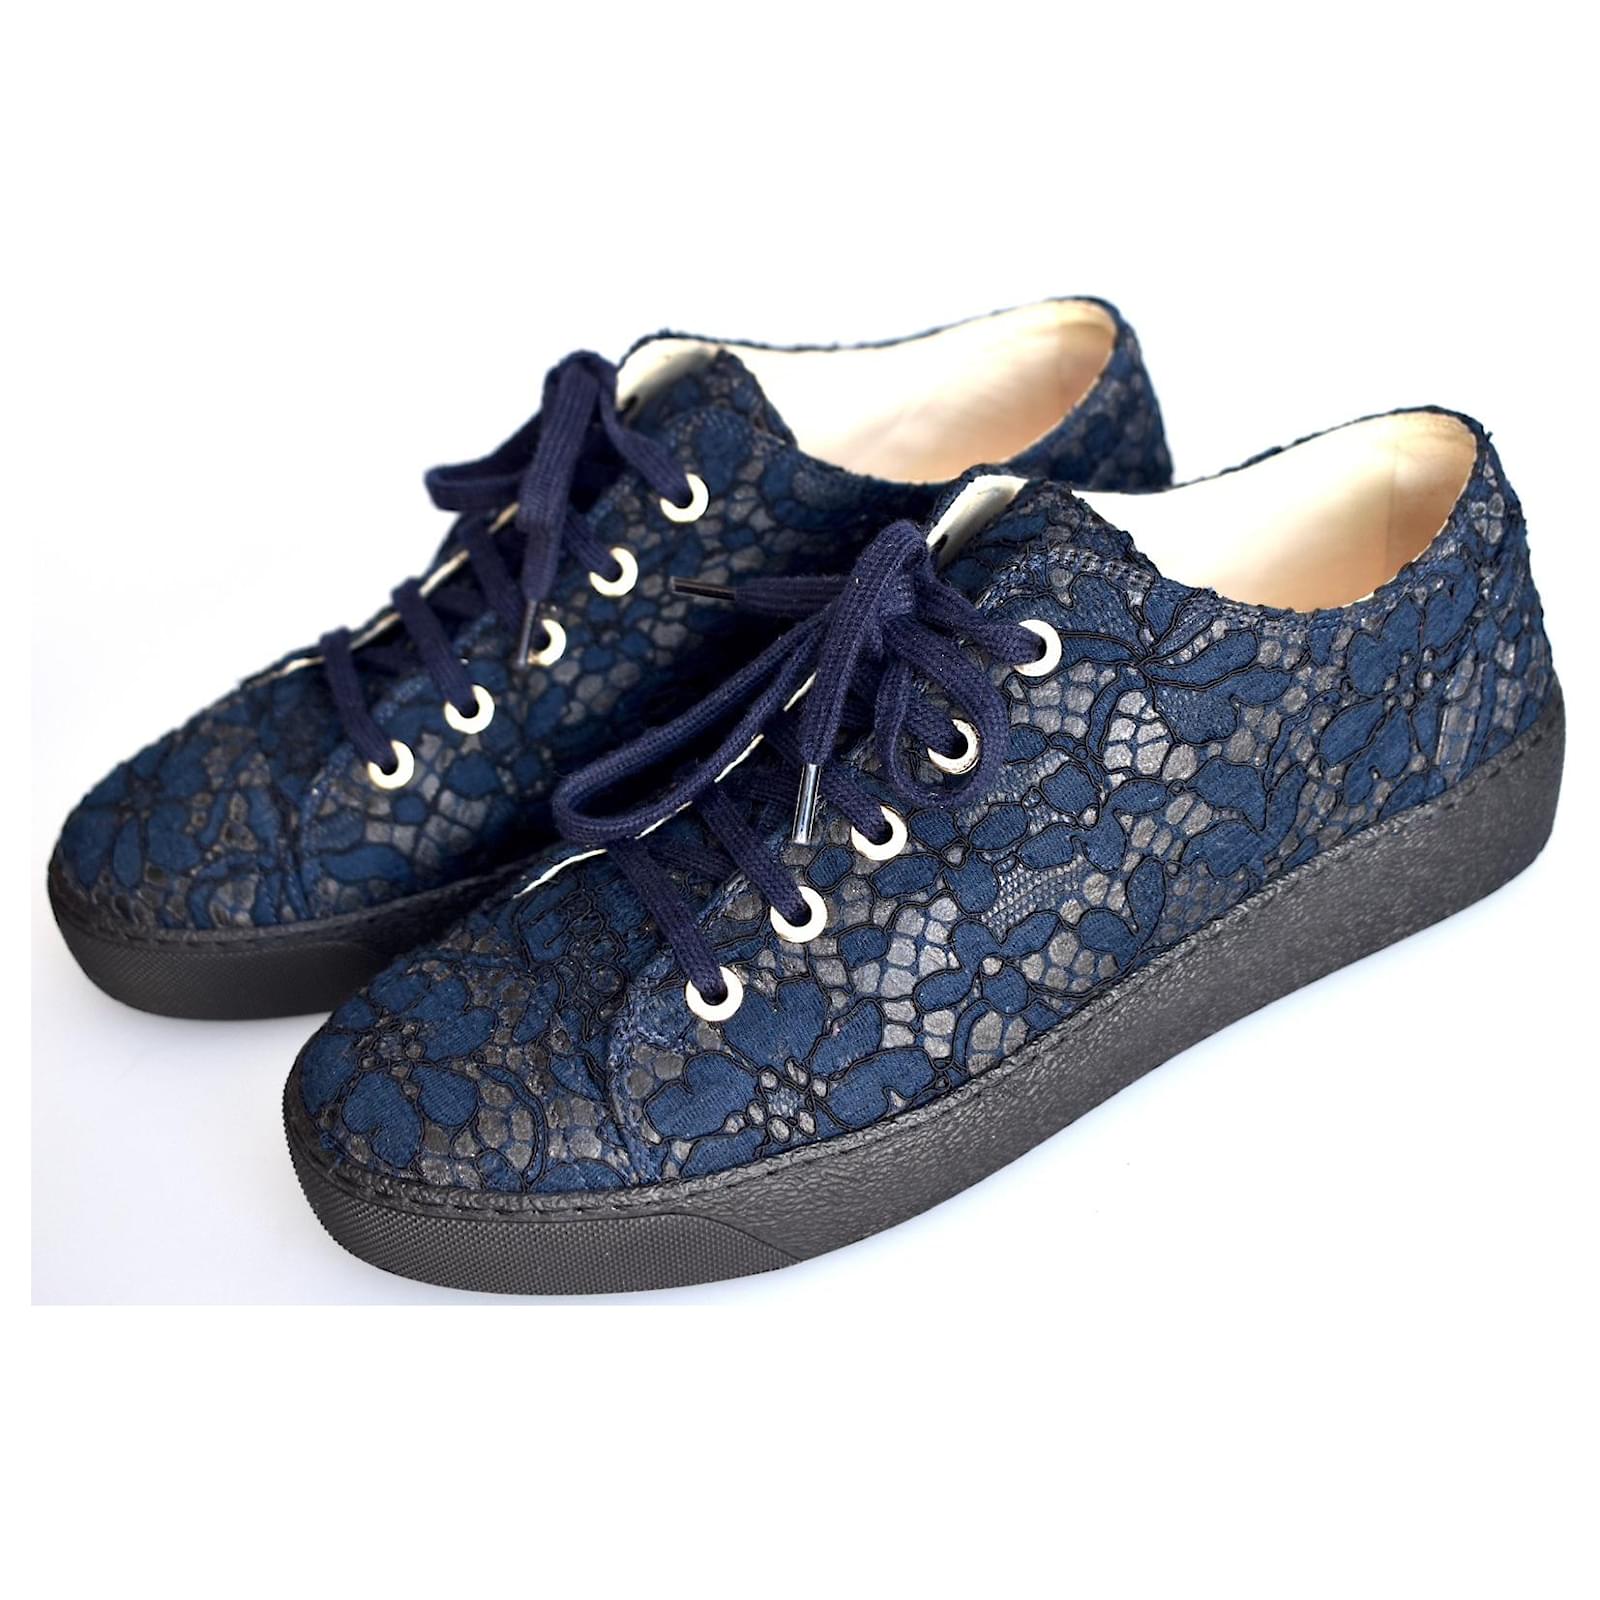 CHANEL, Shoes, Chanel Womens Sport Sprint Sneakers Size 38 Us 8 Blue  Cashmere Low Top Trainers